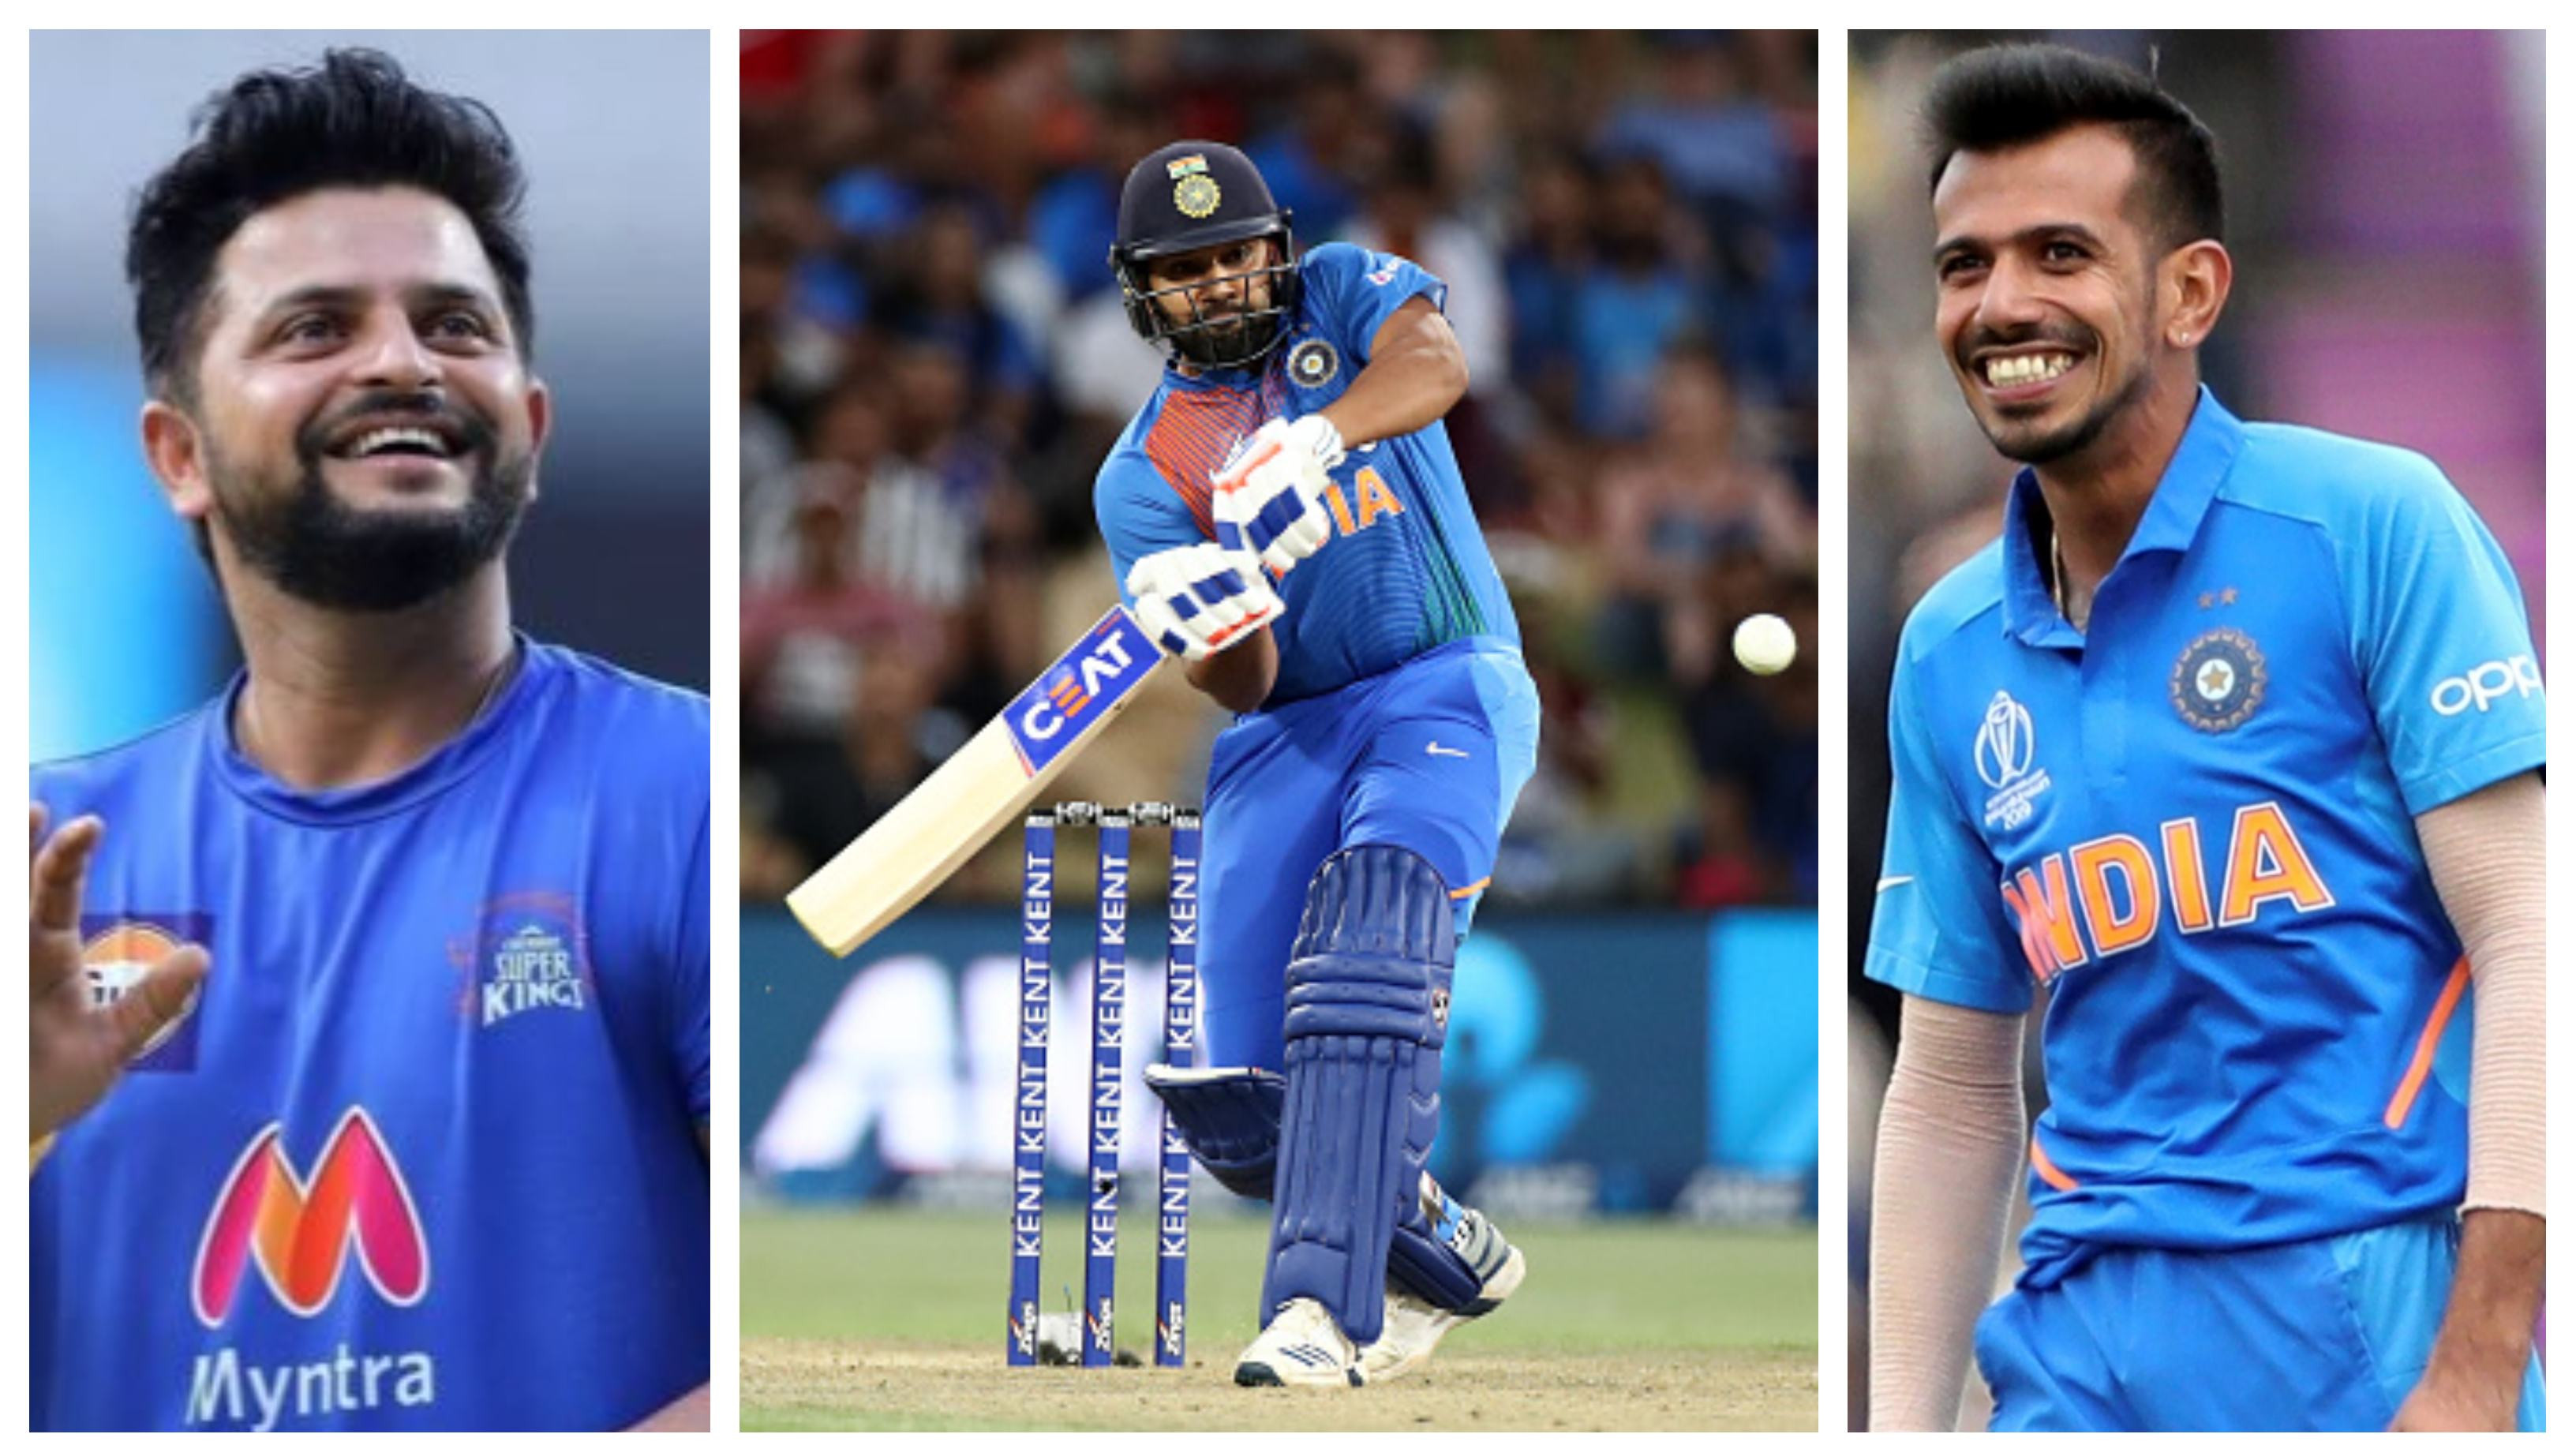 Team India, Indian cricket fraternity send birthday wishes to Rohit Sharma as he turns 34